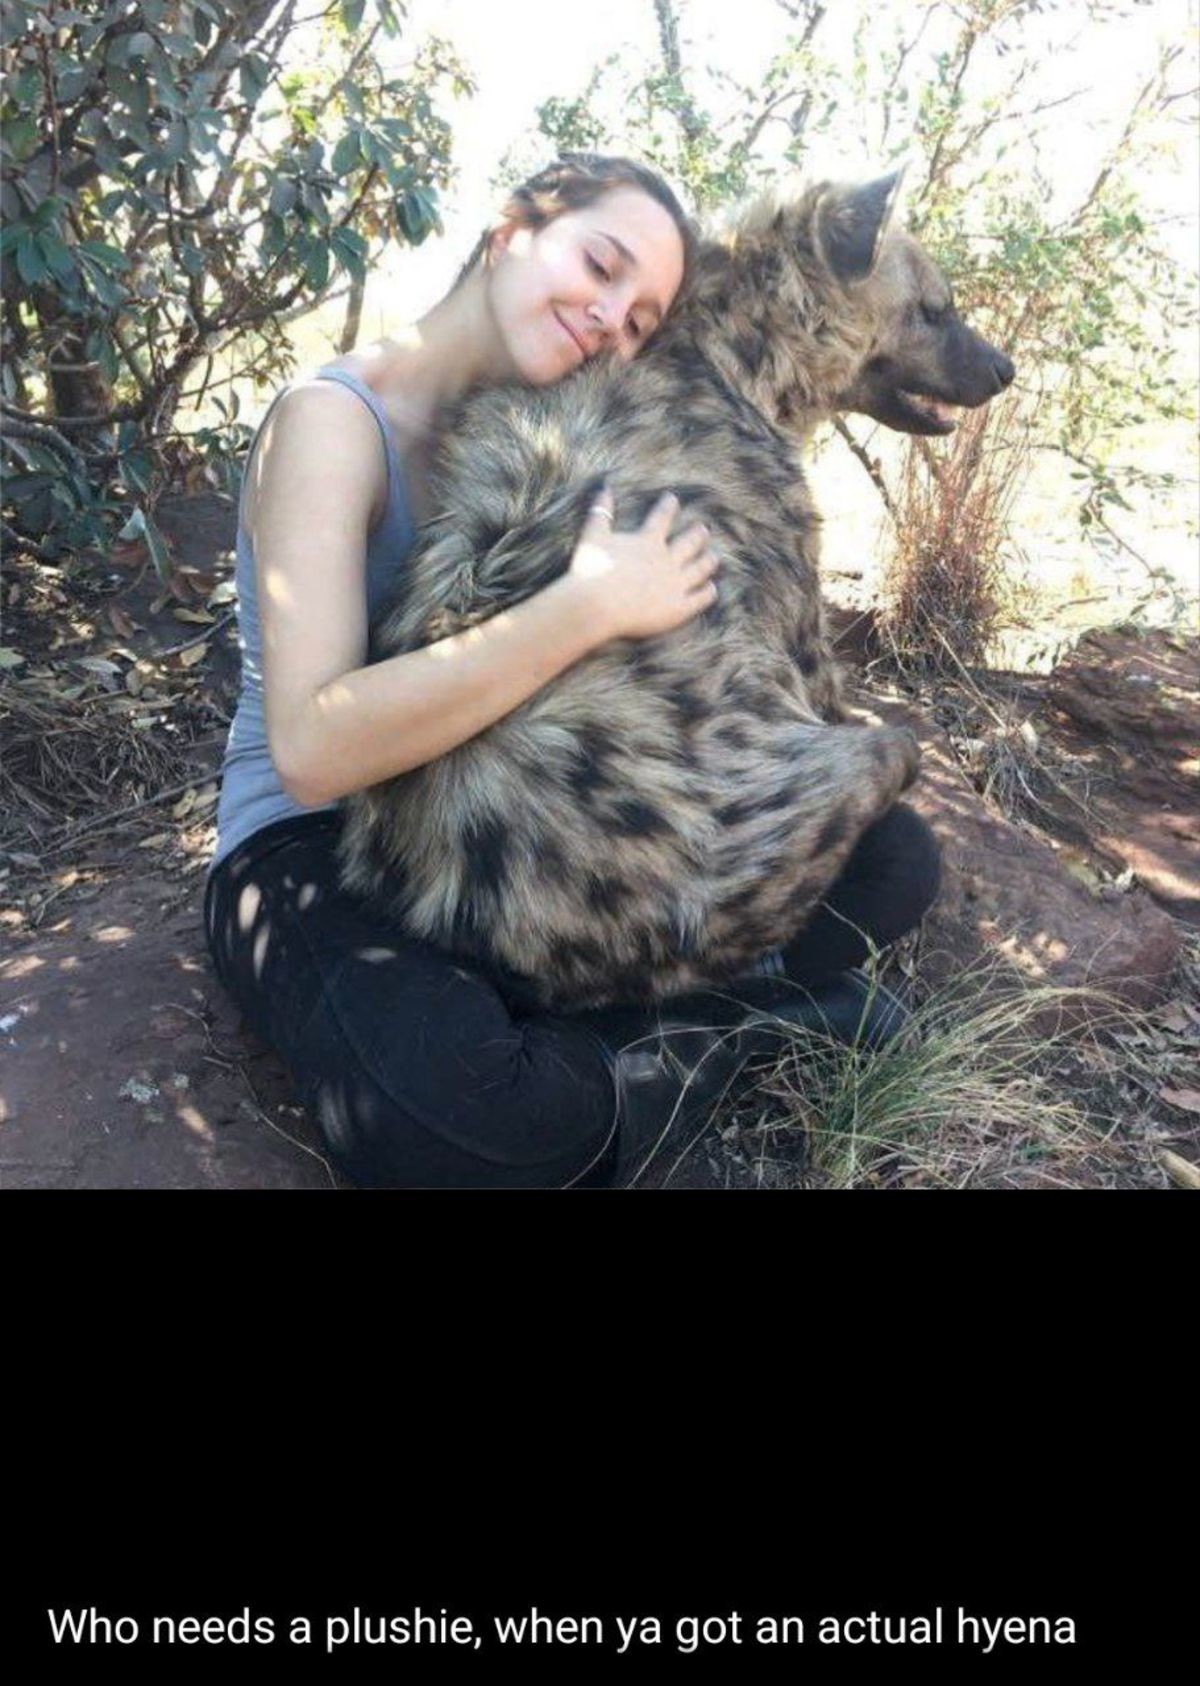 hug yeen. join list: YeenPosting (121 subs)Mention Clicks: 2918Msgs Sent: 11350Mention History.. Eh no, I'll take the plushie any day. I choose life lol